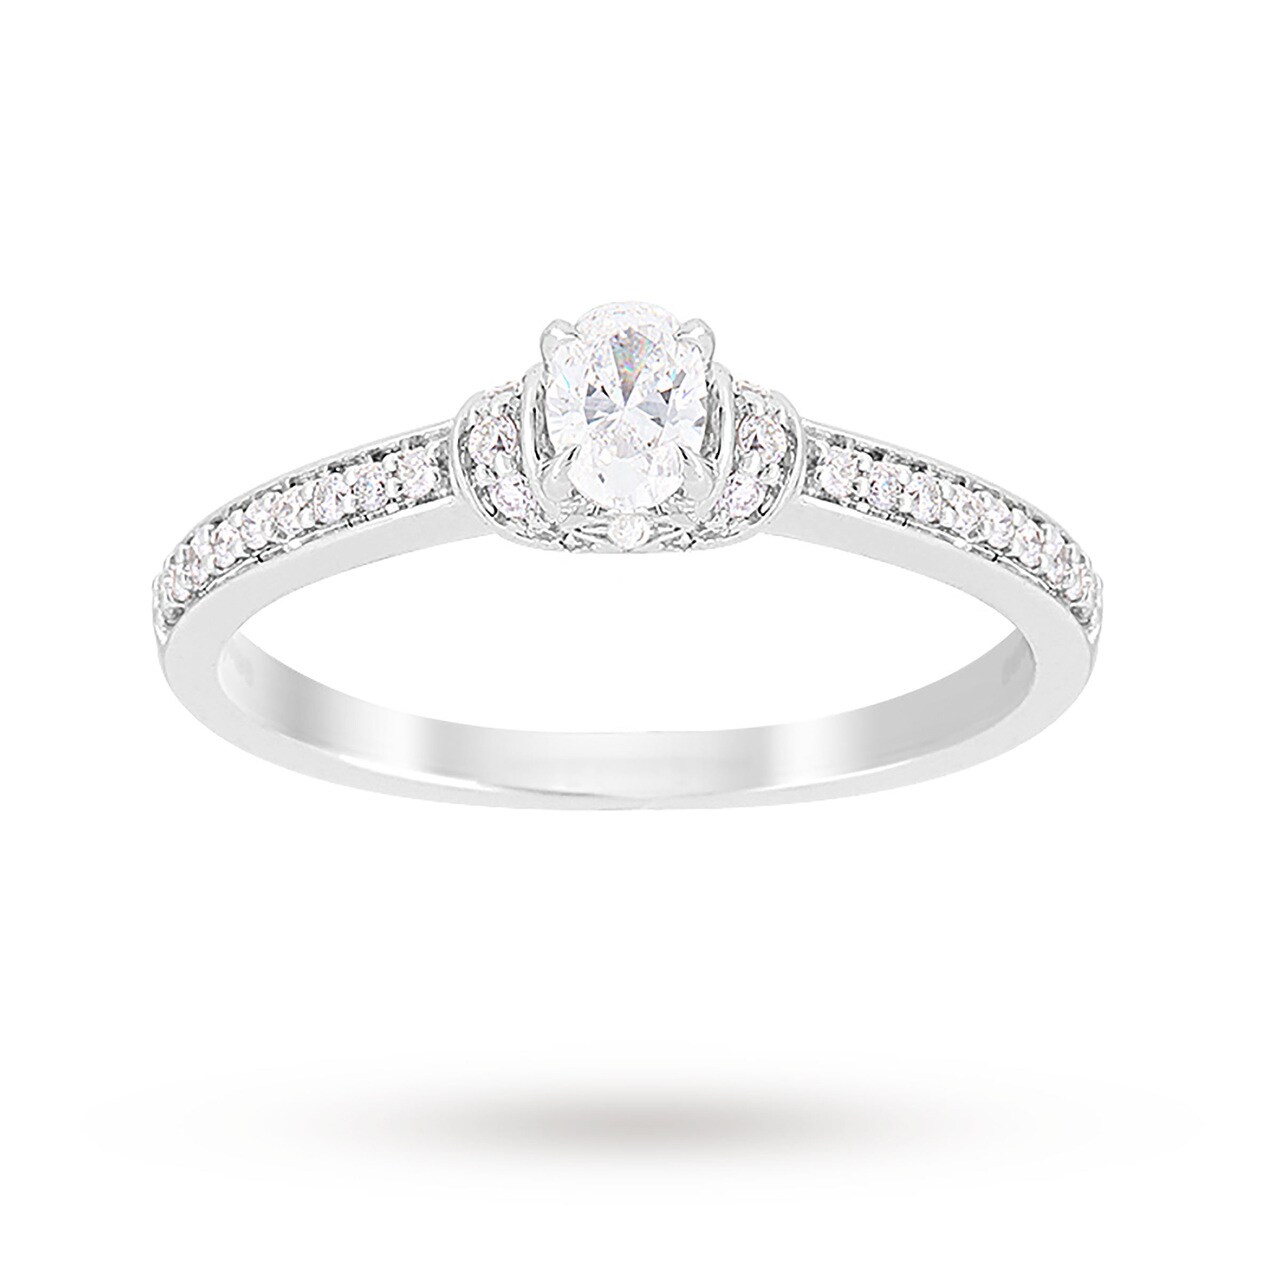 Oval Cut 0.45 Carat Total Weight Diamond Art Deco Style Ring In Platinum - Ring Size M